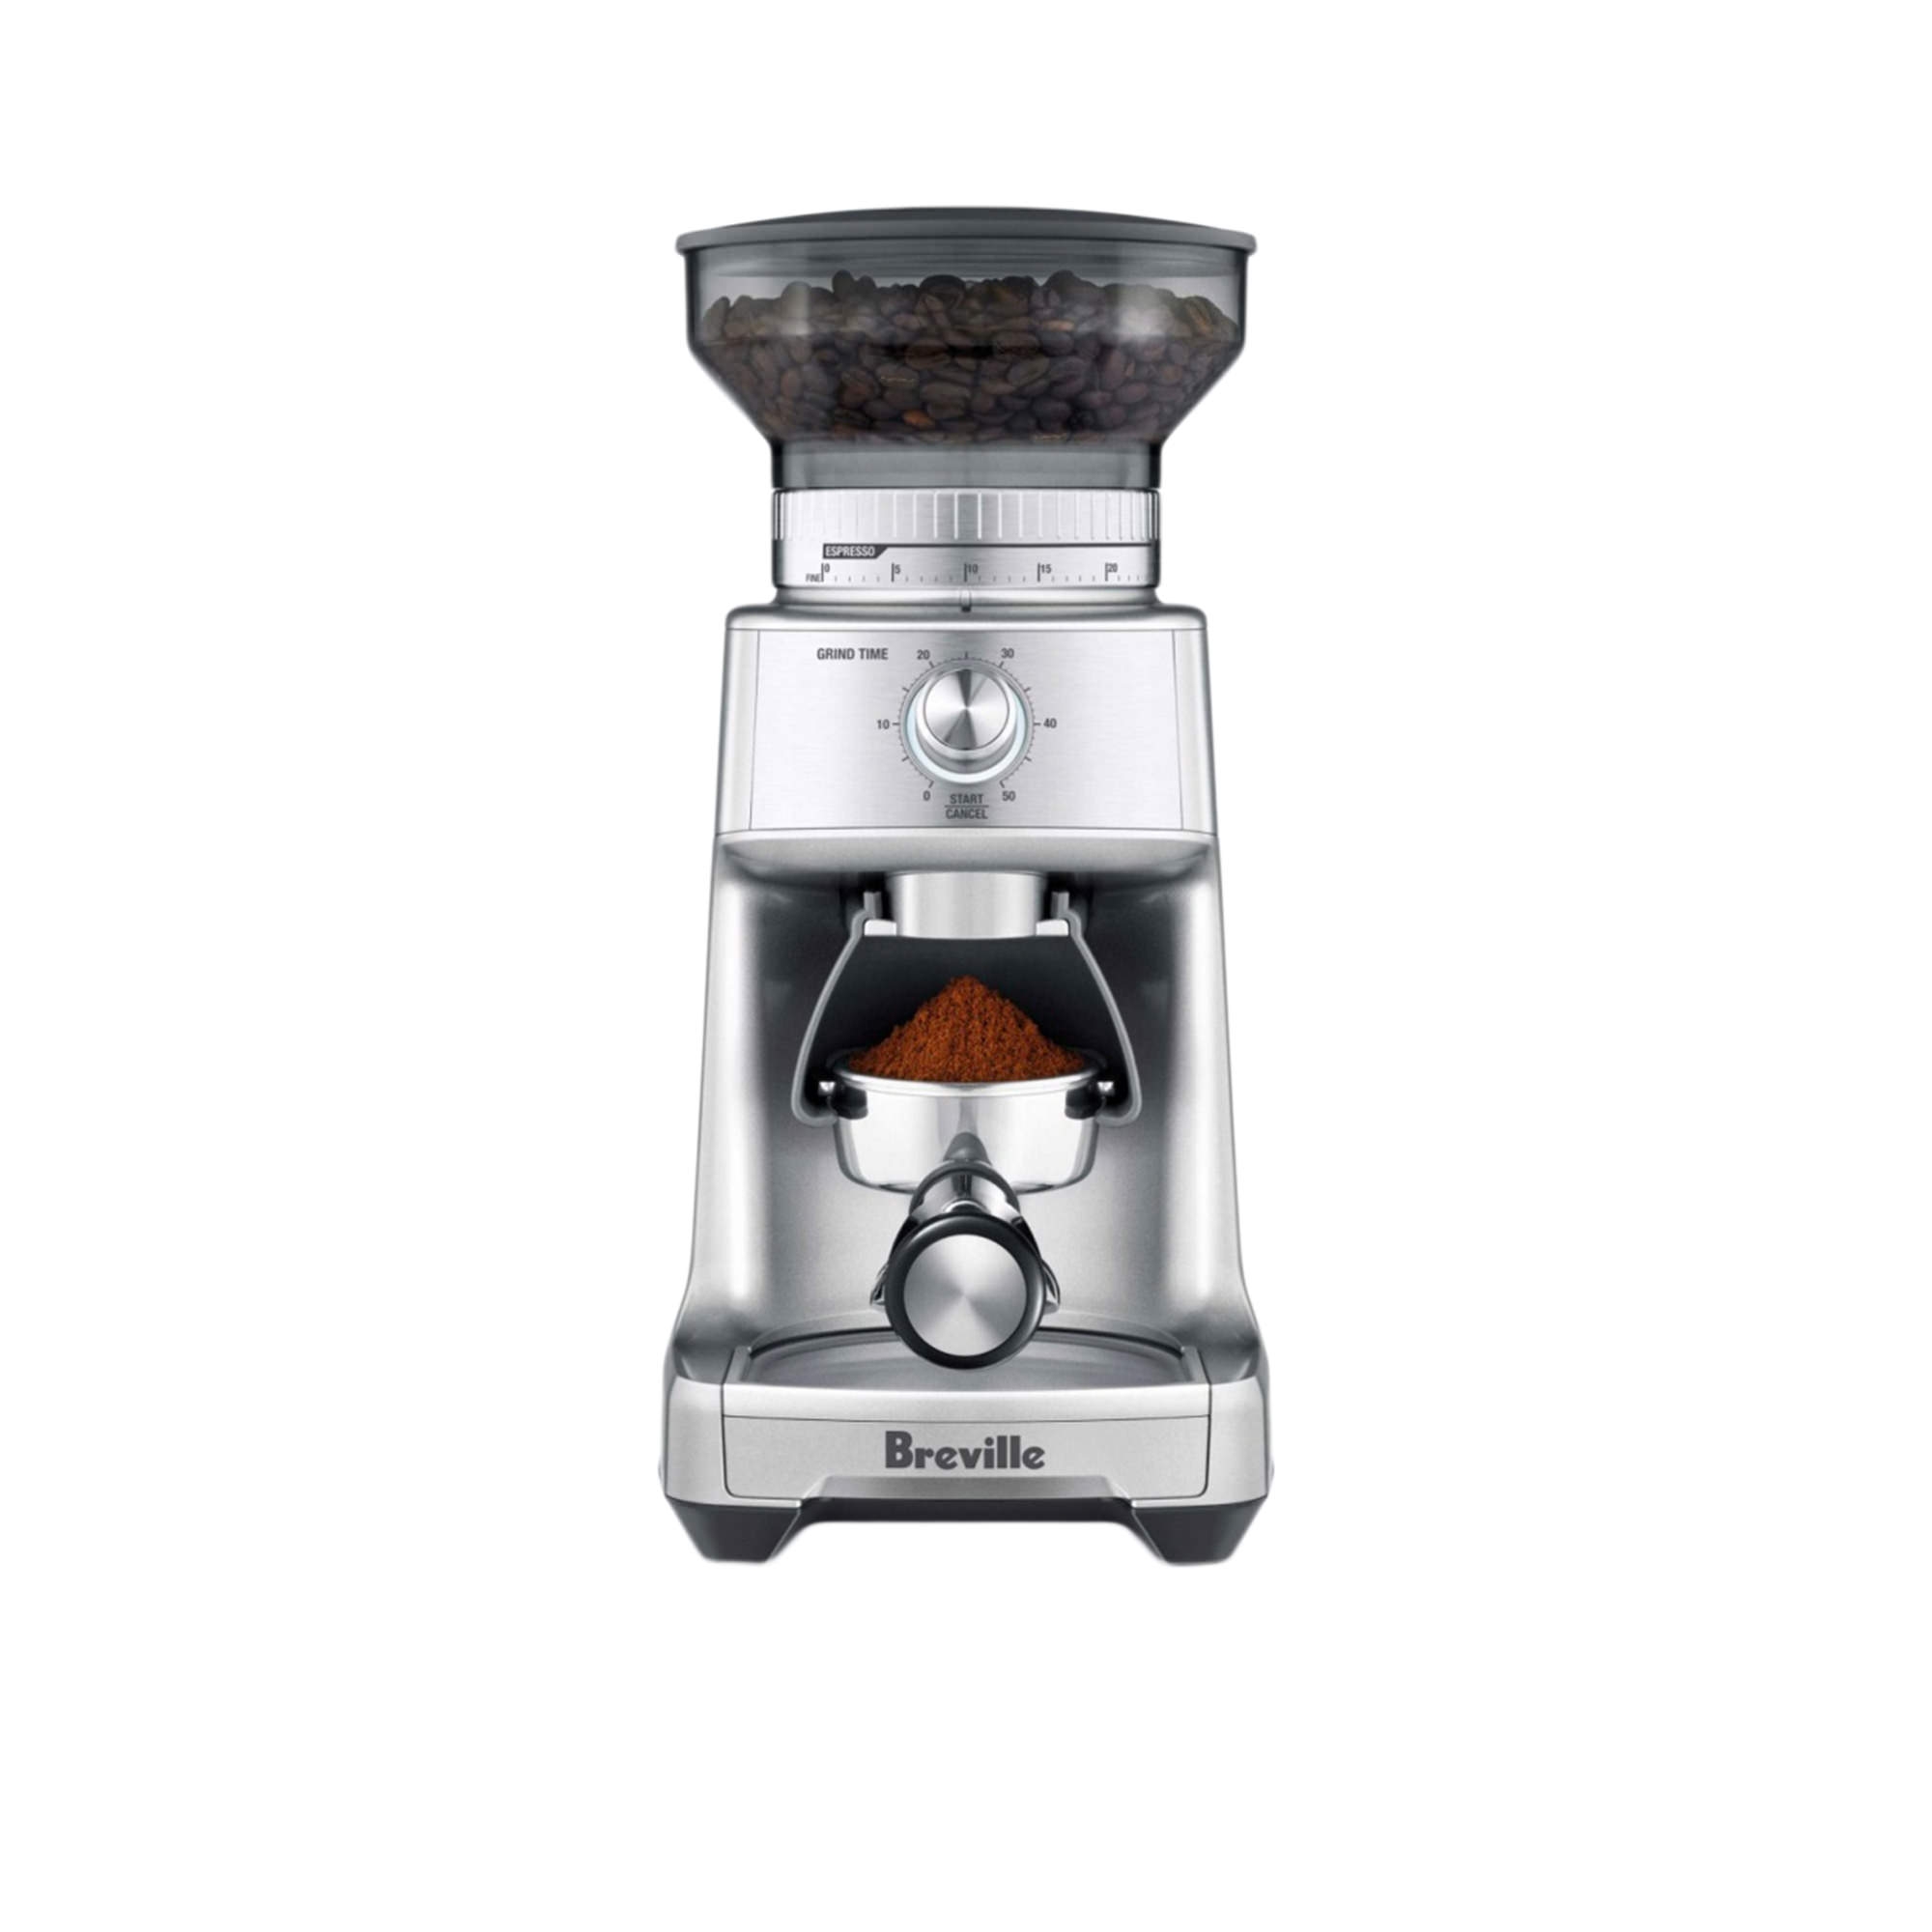 Breville The Dose Control Pro Coffee Grinder Brushed Stainless Steel Image 1